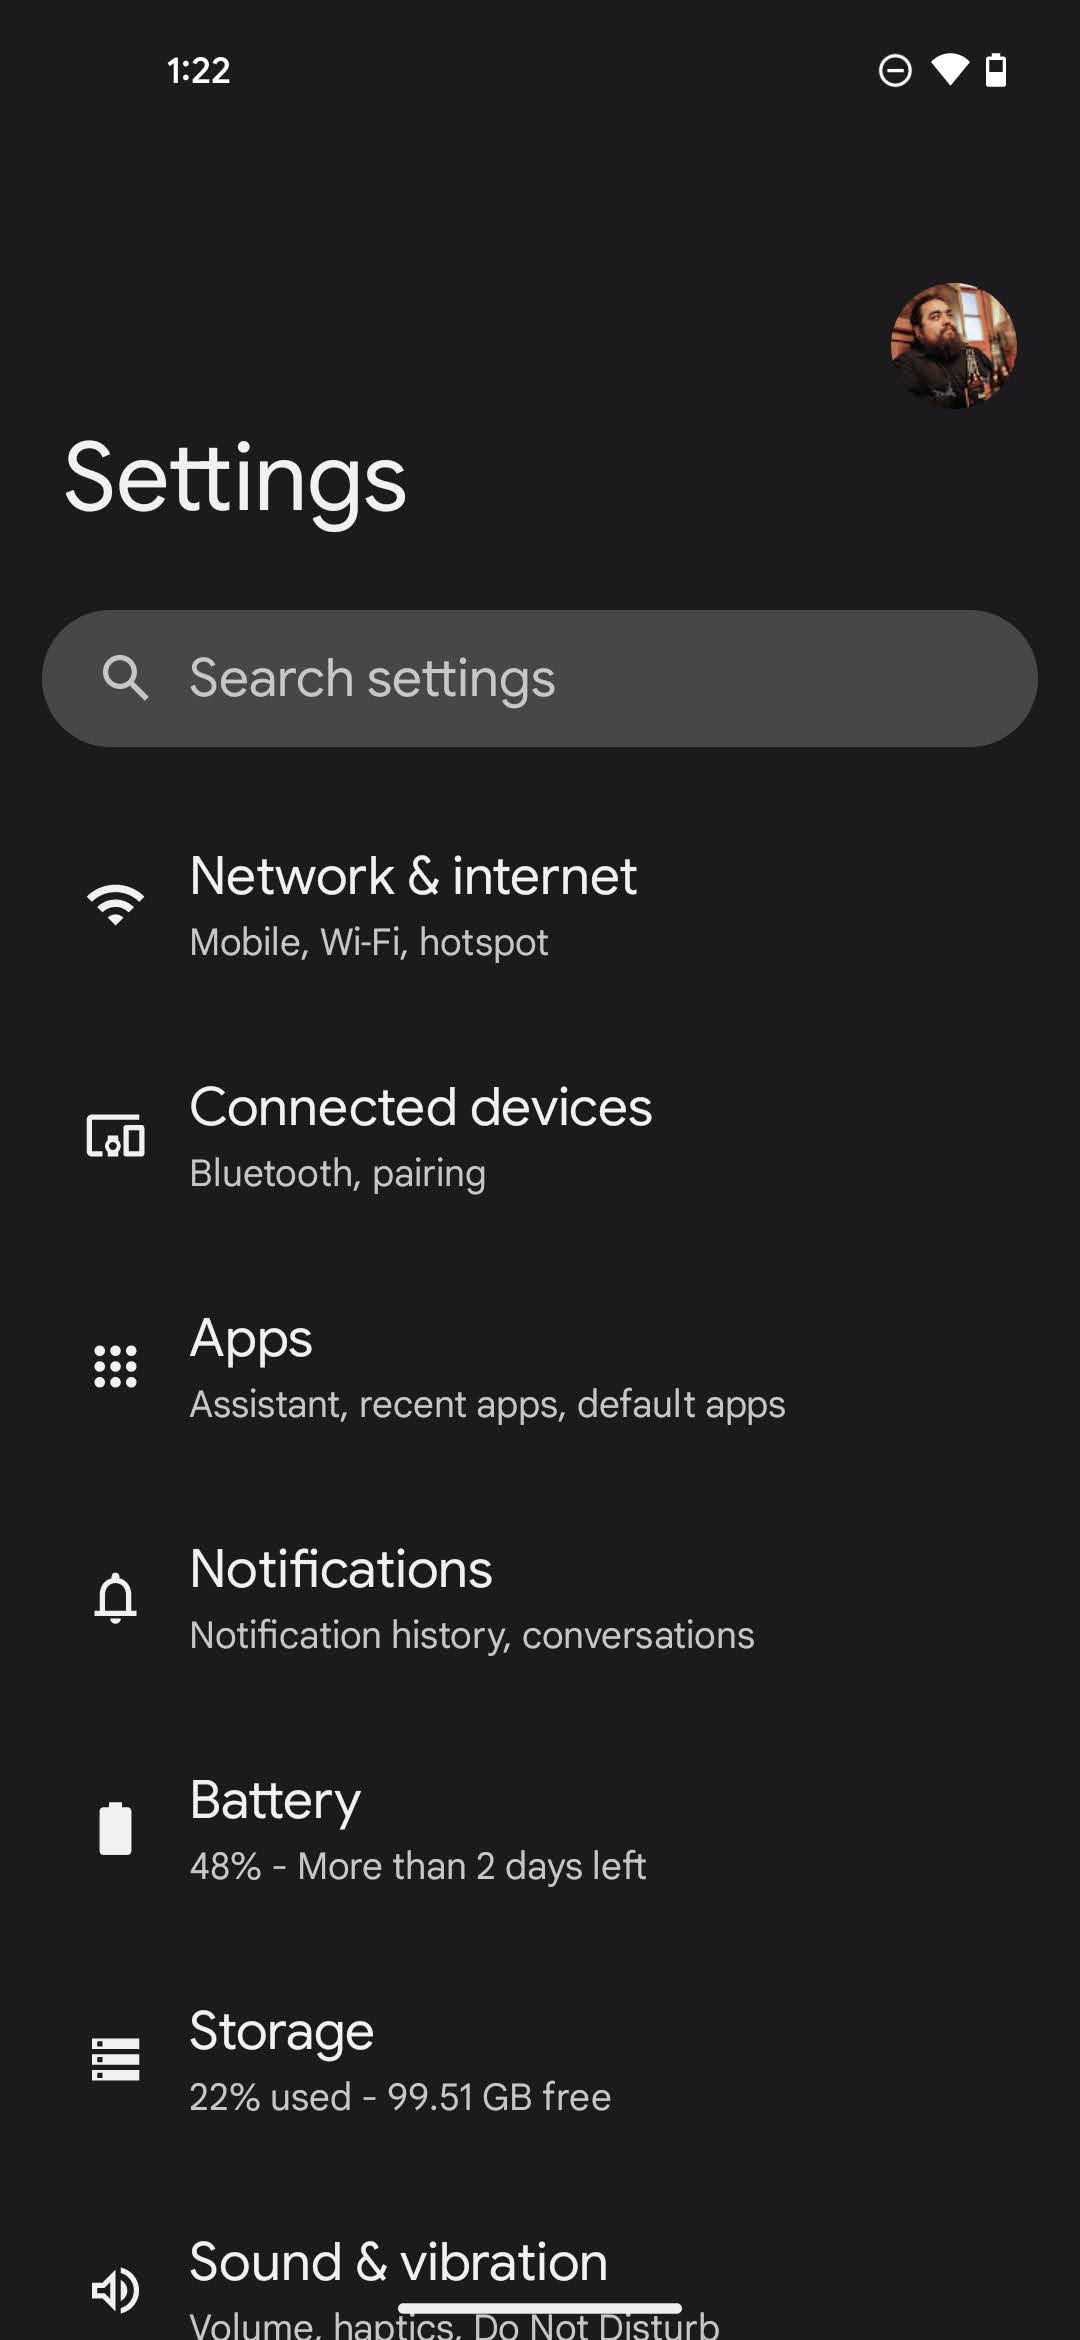 How to turn on Do Not Disturb mode in Settings 1